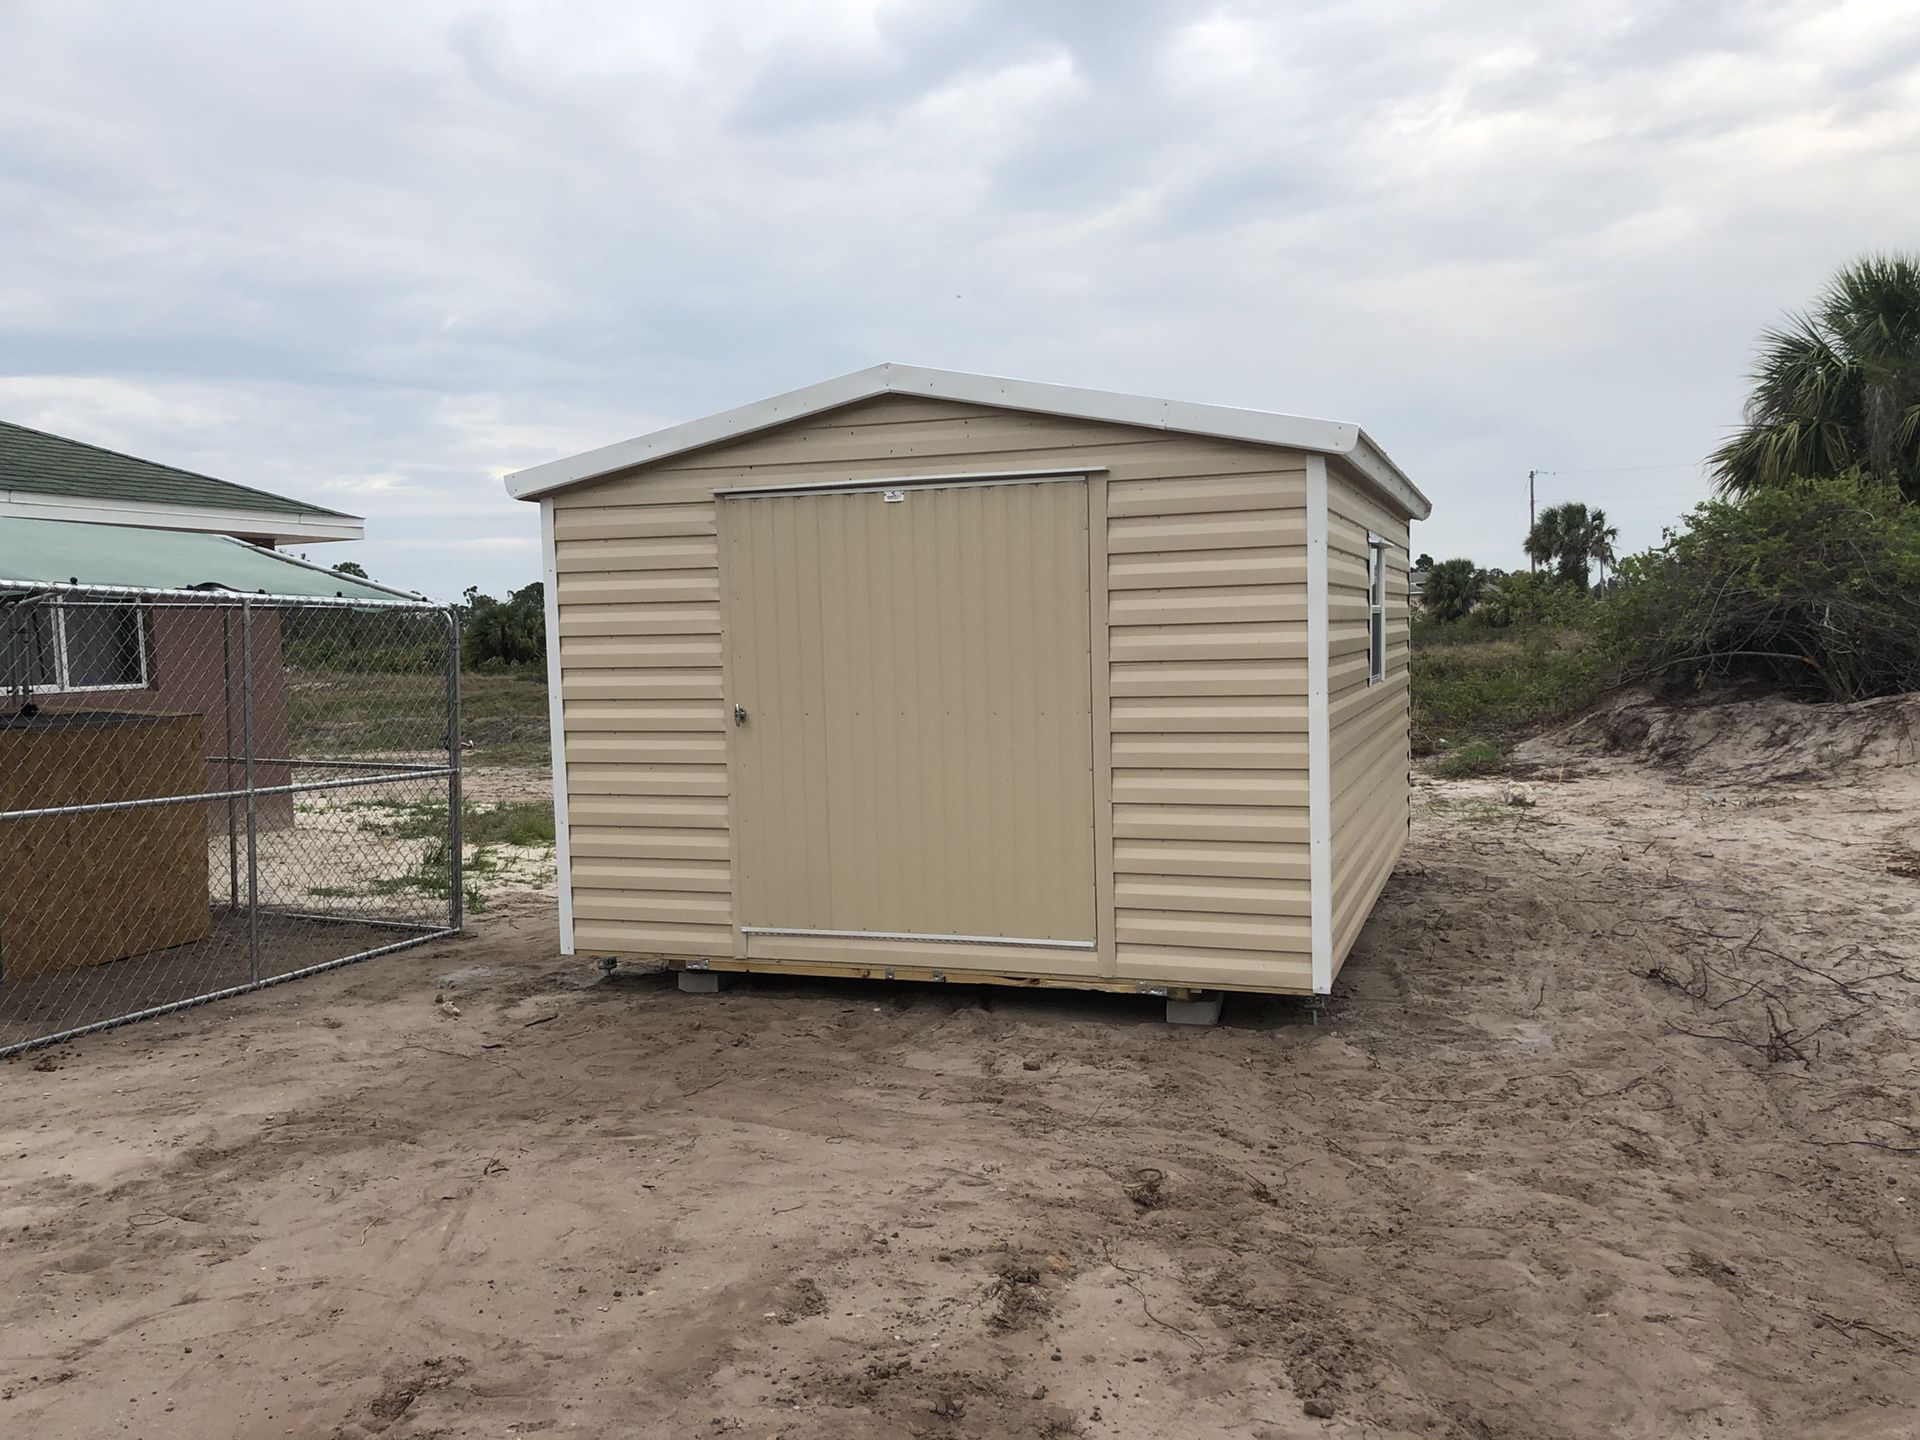 11’x14’ State Approved Shed $3150